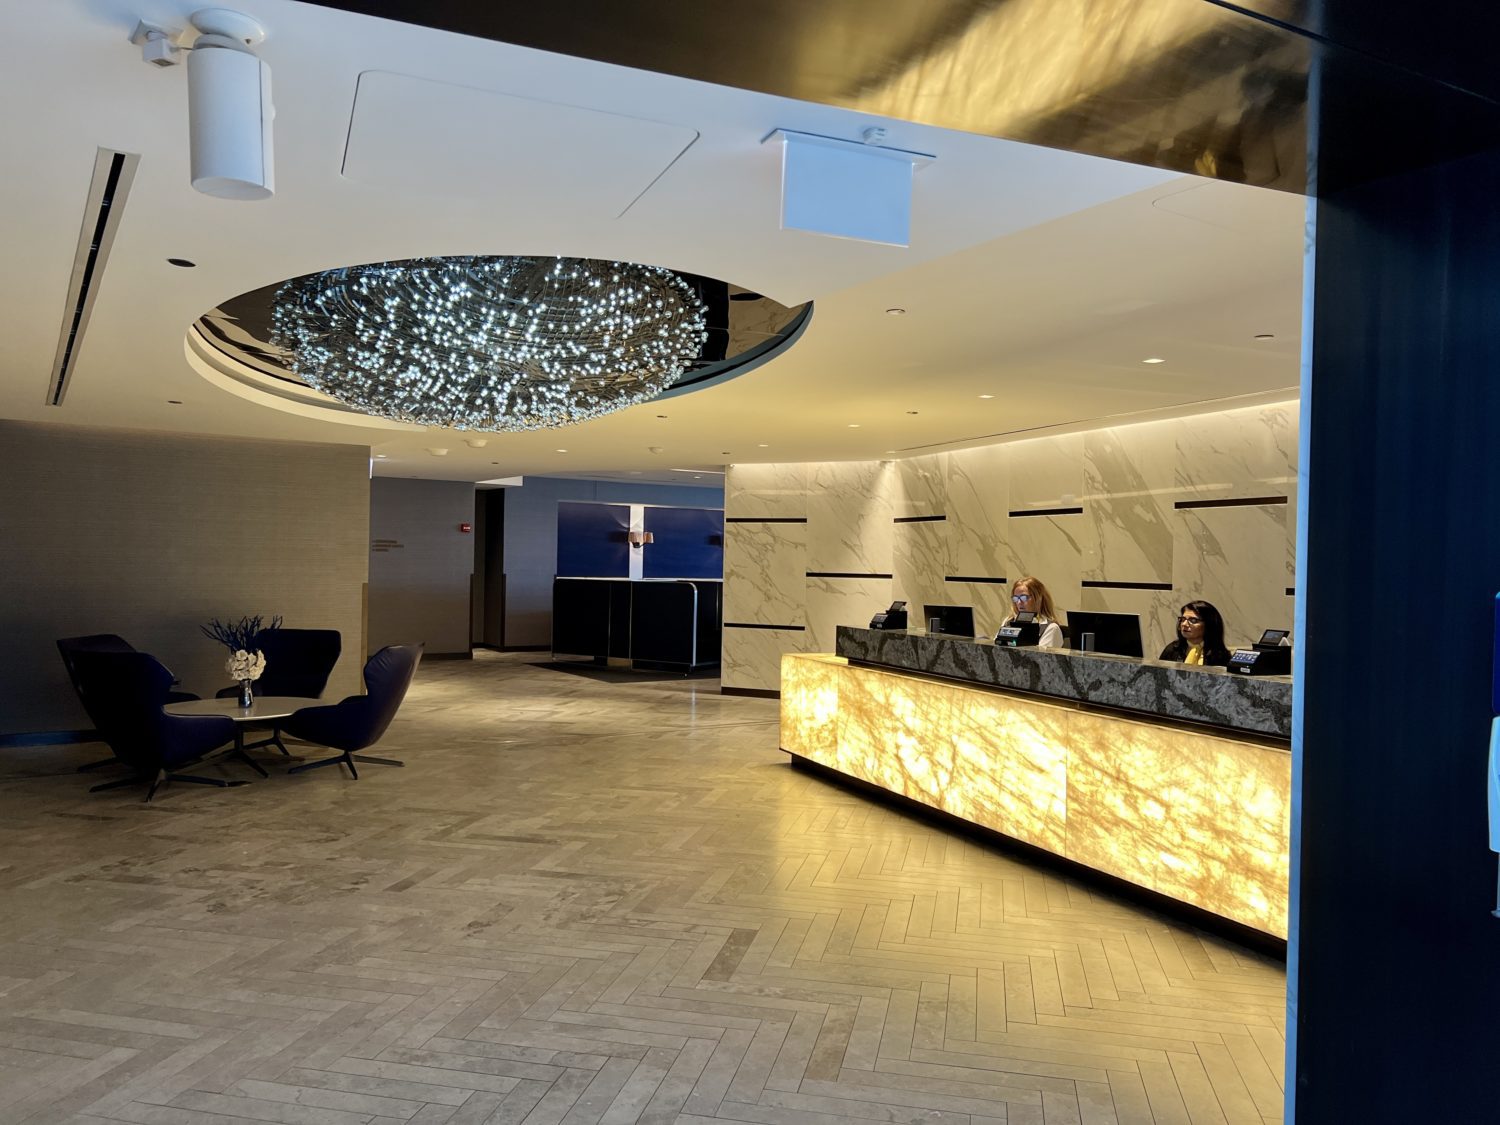 united polaris lounge chicago check-in desk  Beautiful But Busy: United Polaris Lounge Chicago-O&#039;Hare (ORD) Review – Thrifty Traveler &#8211; Thrifty Traveler united polaris lounge chicago desk scaled